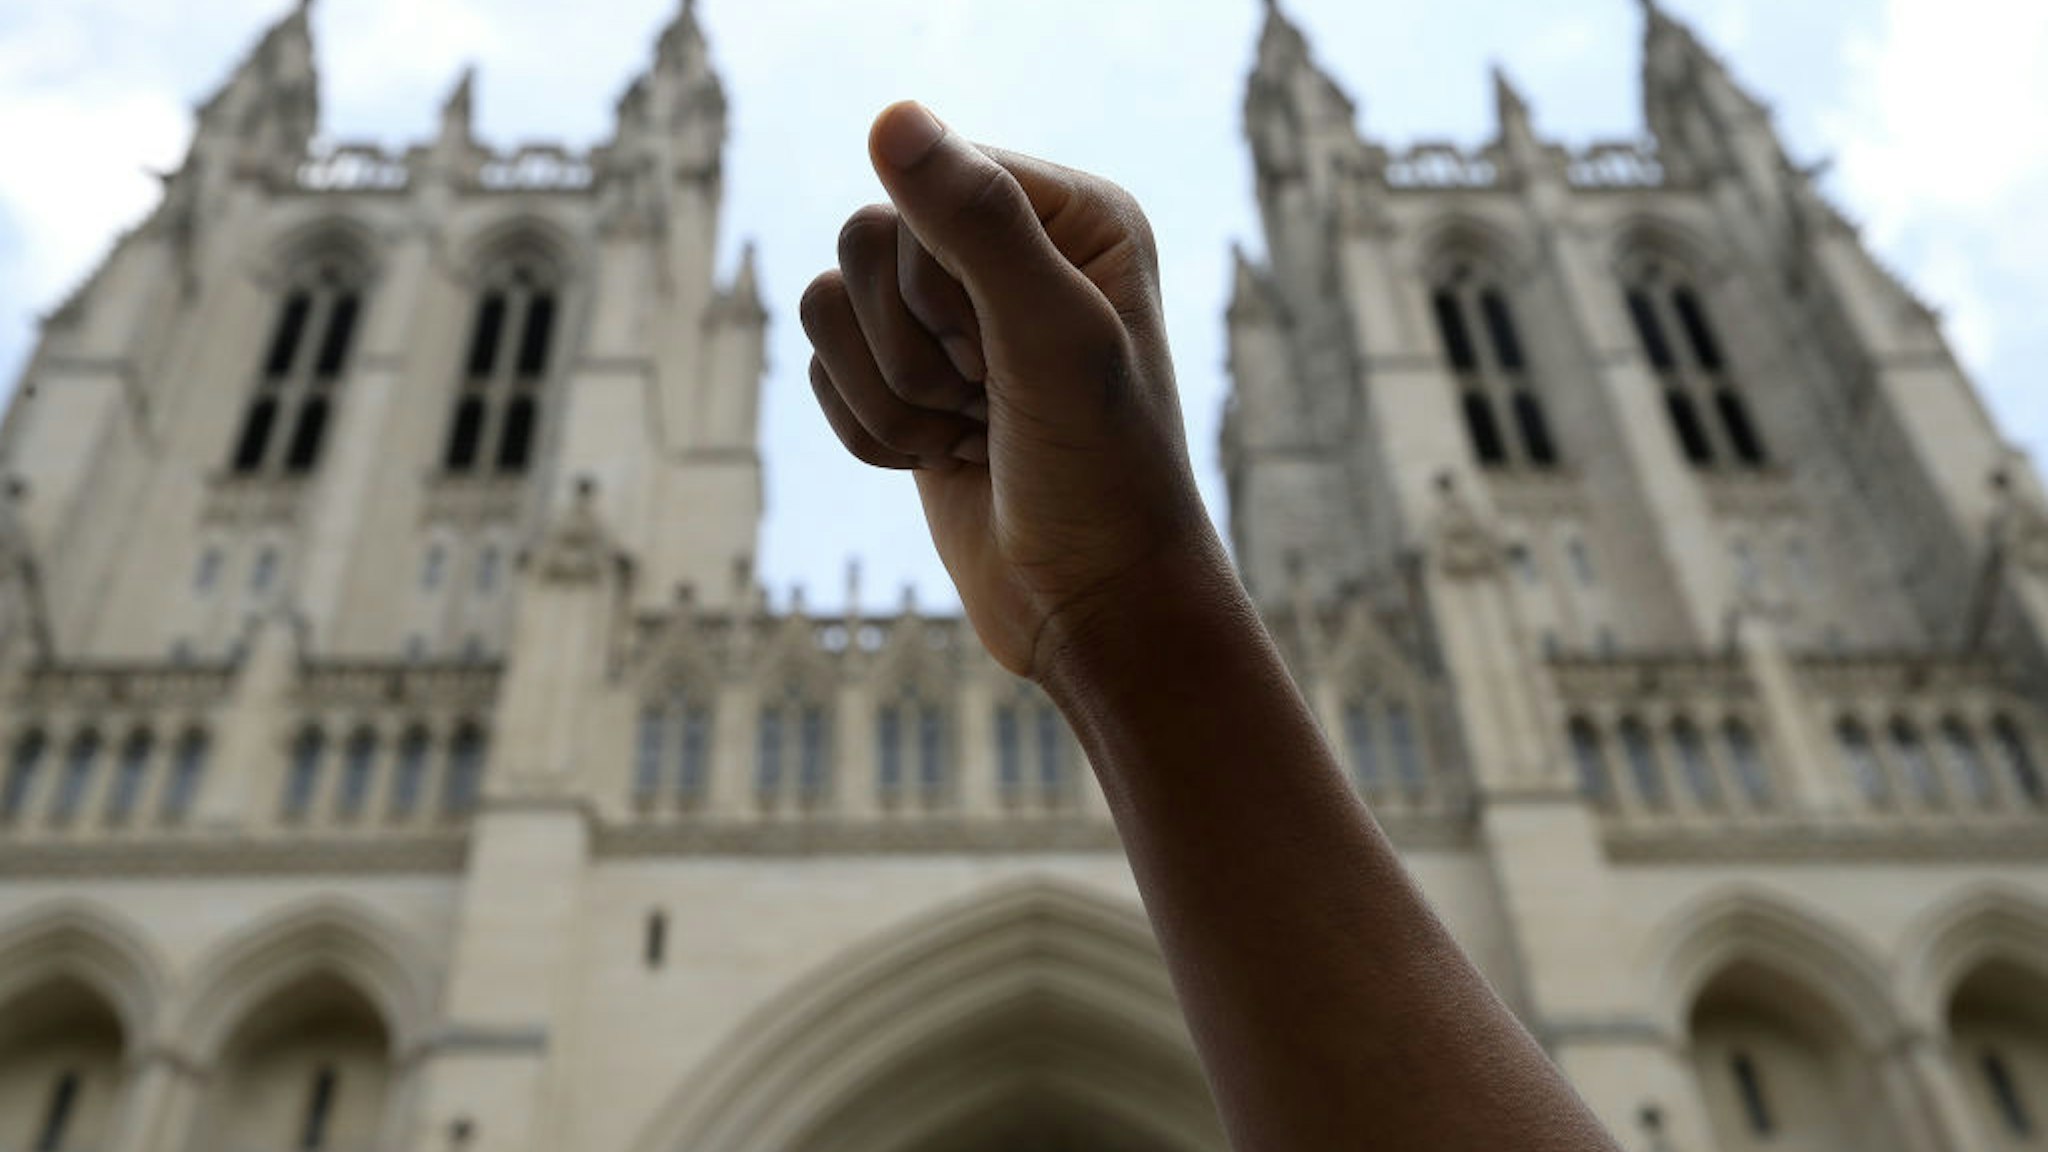 WASHINGTON, DC - JUNE 05: A student holds up a fist during a Black Lives Matter sit-in at the National Cathedral during a peaceful protest against police brutality and the death of George Floyd, on June 5, 2020 in Washington, DC. Protests in cities throughout the country are largely peaceful in the wake of the death of George Floyd, a black man who was killed in police custody in Minneapolis on May 25. (Photo by Win McNamee/Getty Images)